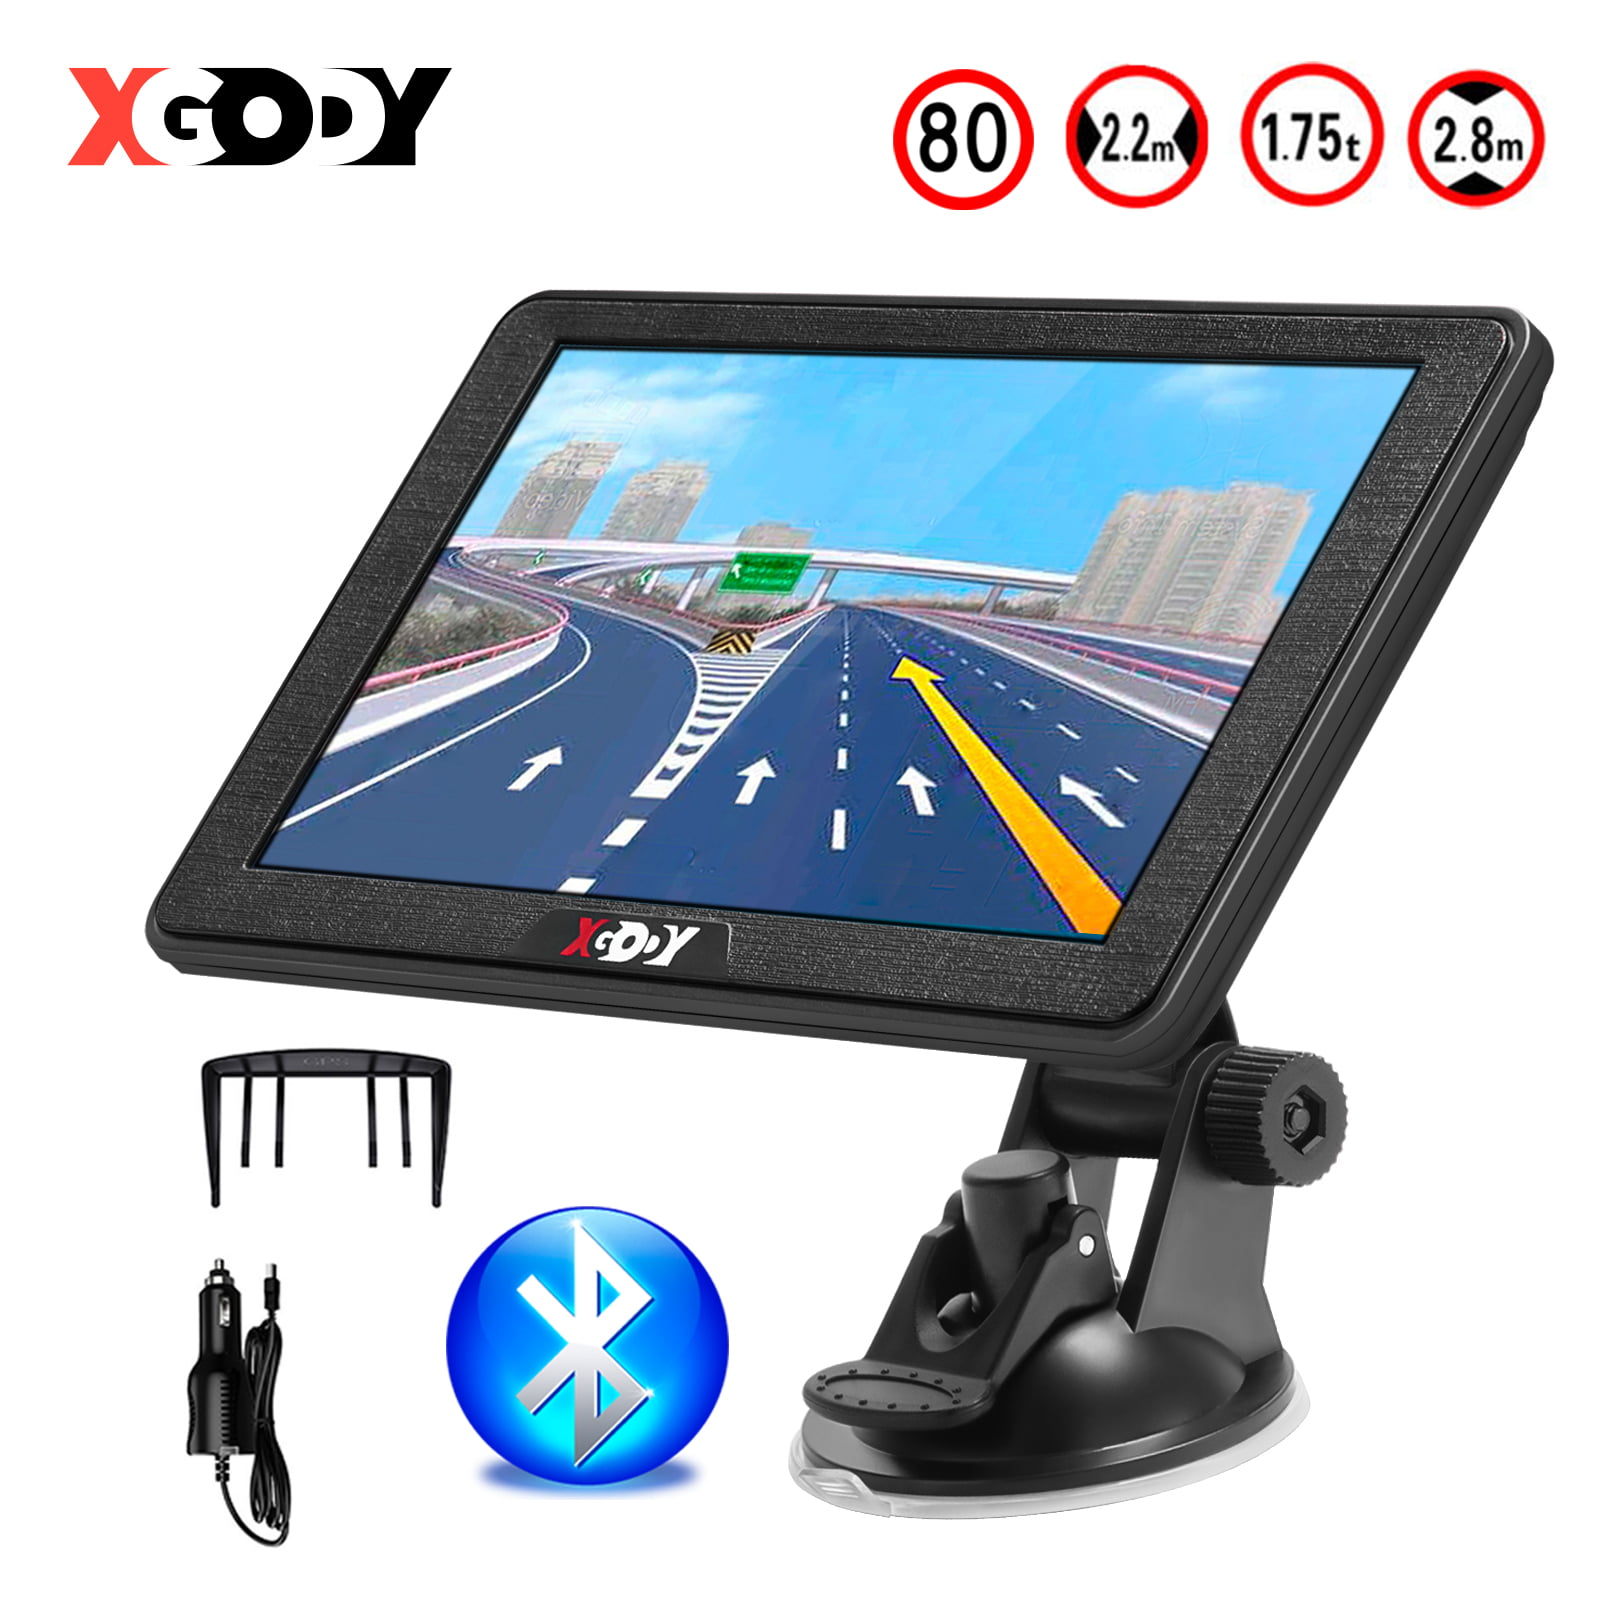 SAT NAV GPS Navigation System For Car Xgody Lorry HGV Navigator Device 7 Inch Capacitive Touch Screen Support Hands-Free Calling Speed Camera Alert Free Lifetime Maps for UK Europe 